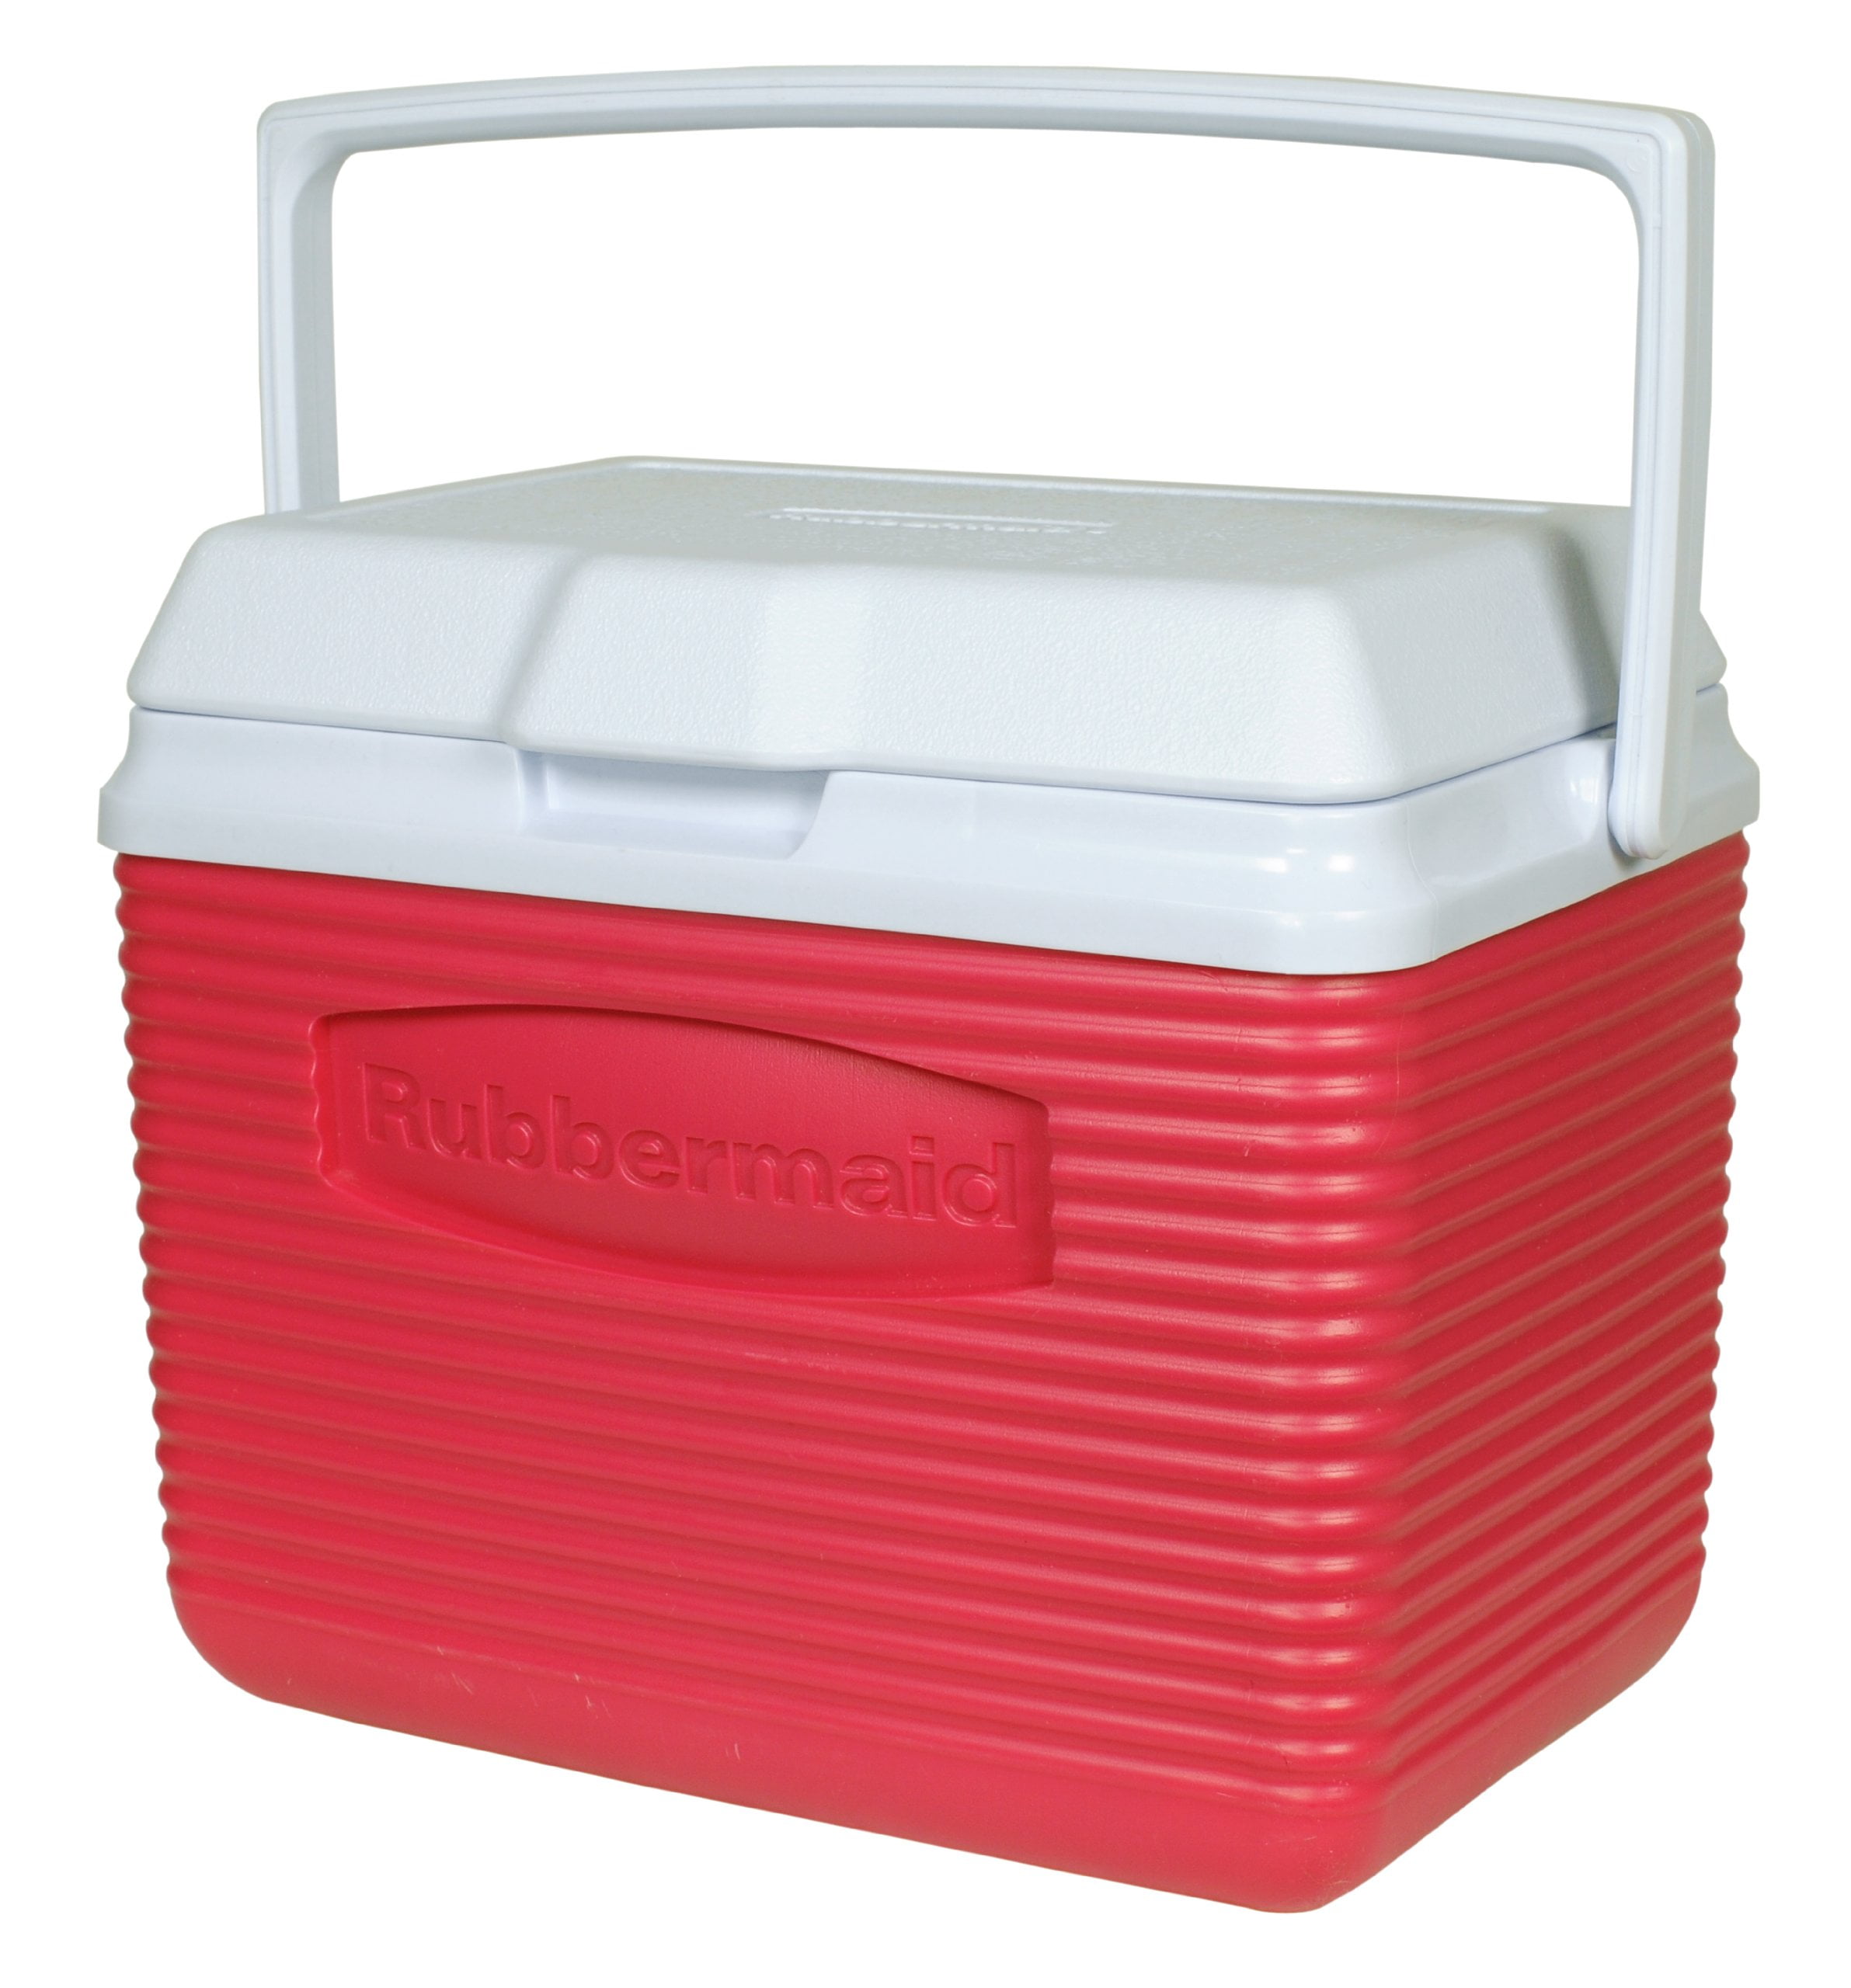 Rubbermaid Cooler / Ice Chest, 5-Quart, Red